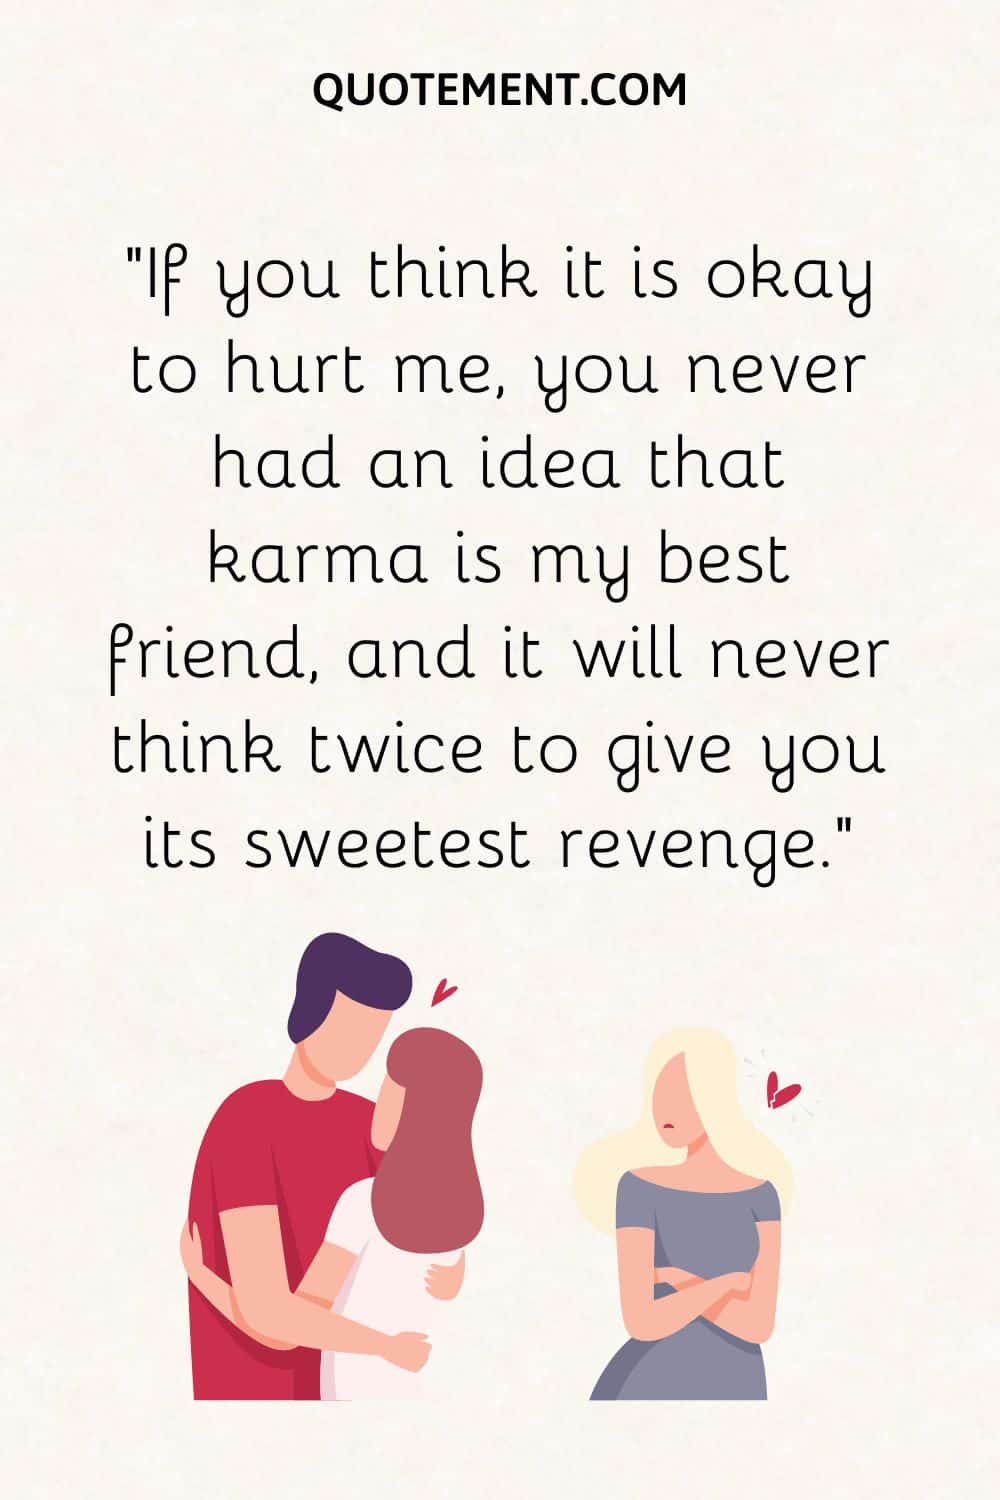 If you think it is okay to hurt me, you never had an idea that karma is my best friend, and it will never think twice to give you its sweetest revenge